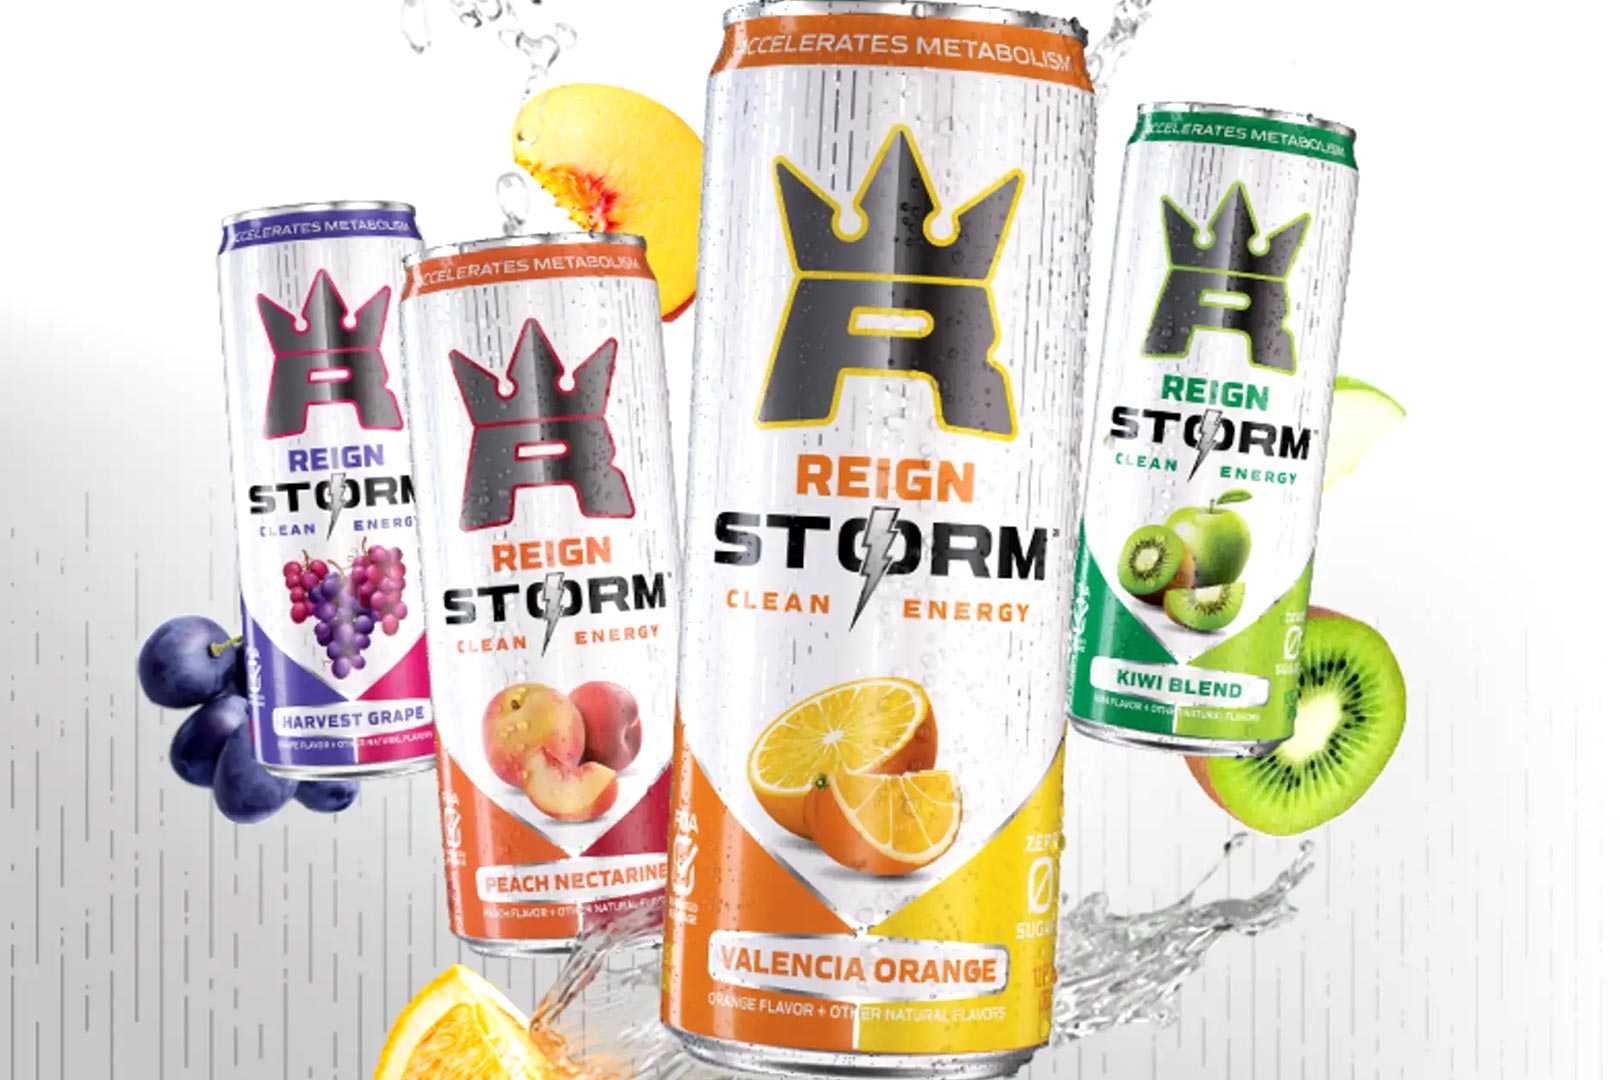 Where To Buy Reign Storm Energy Drink